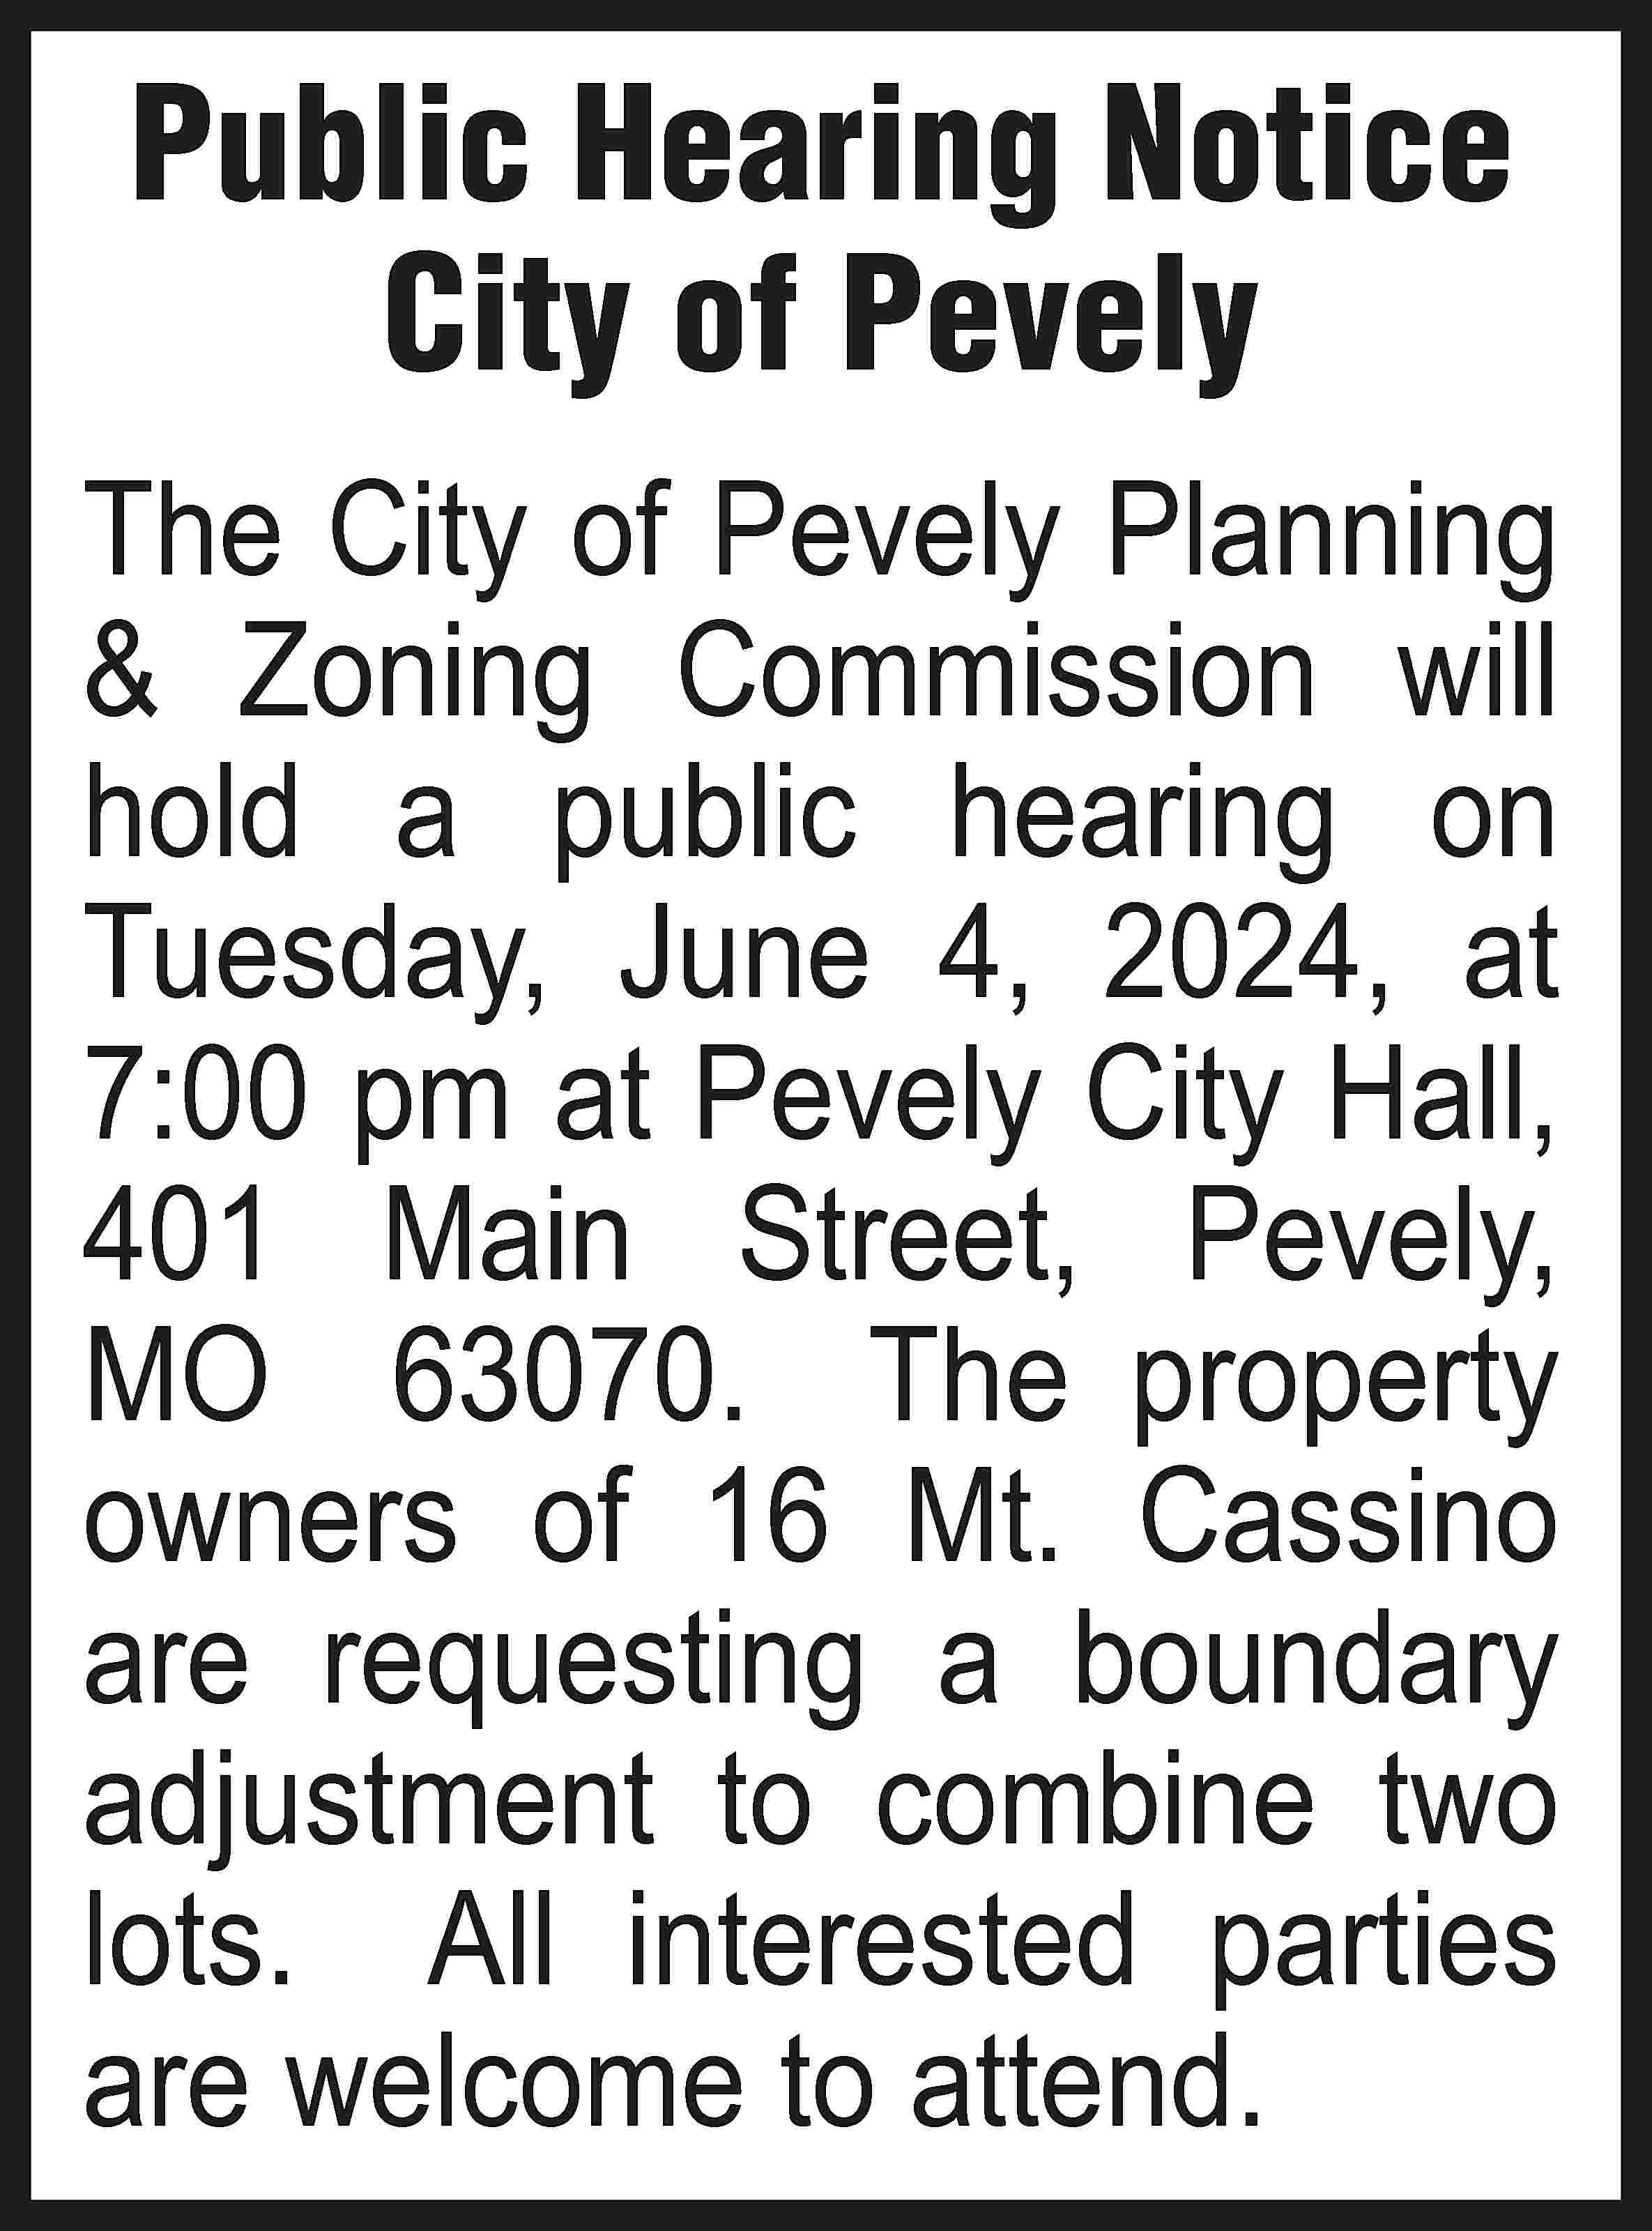 Public Hearing Notice City of  Public Hearing Notice City of Pevely The City of Pevely Planning & Zoning Commission will hold a public hearing on Tuesday, June 4, 2024, at 7:00 pm at Pevely City Hall, 401 Main Street, Pevely, MO 63070. The property owners of 16 Mt. Cassino are requesting a boundary adjustment to combine two lots. All interested parties are welcome to attend.